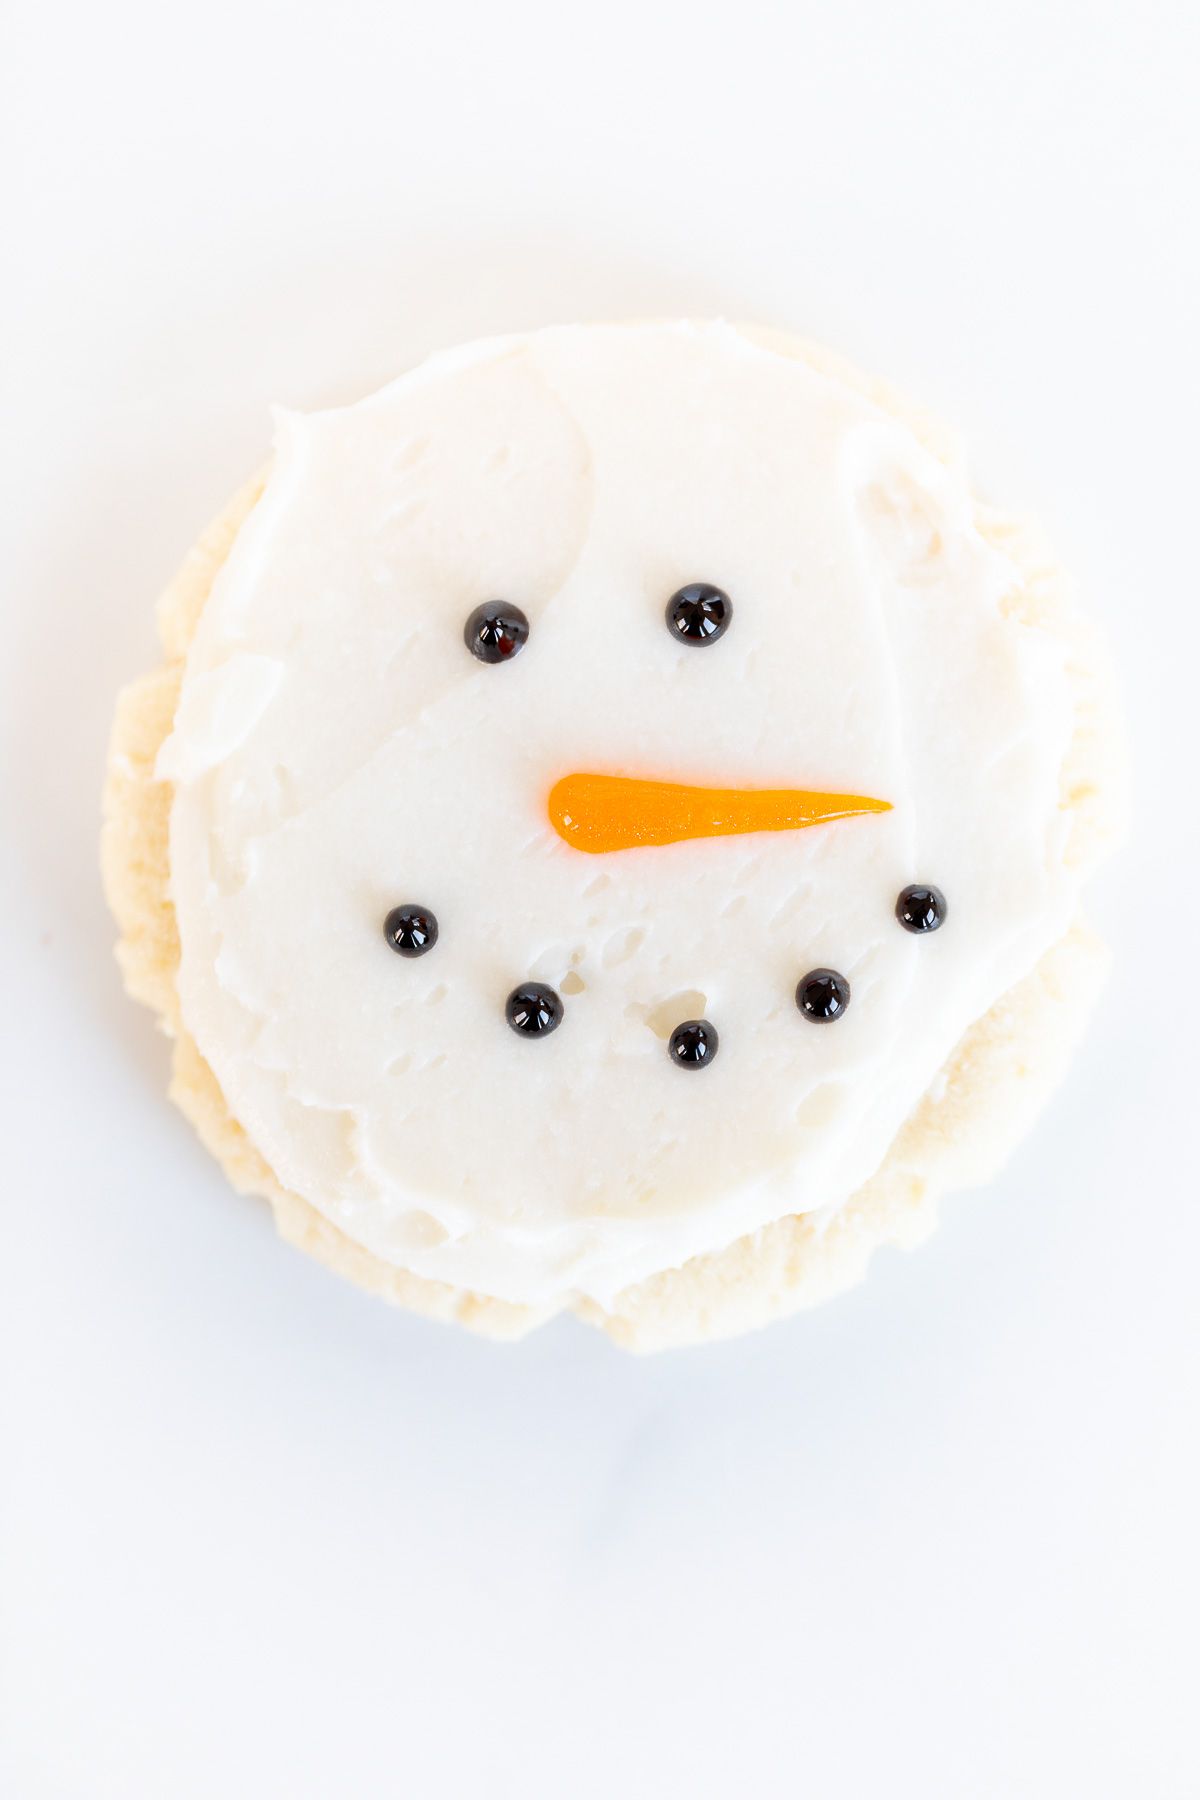 Round Christmas Sugar Cookie decorated with snowmen face on a marble surface.